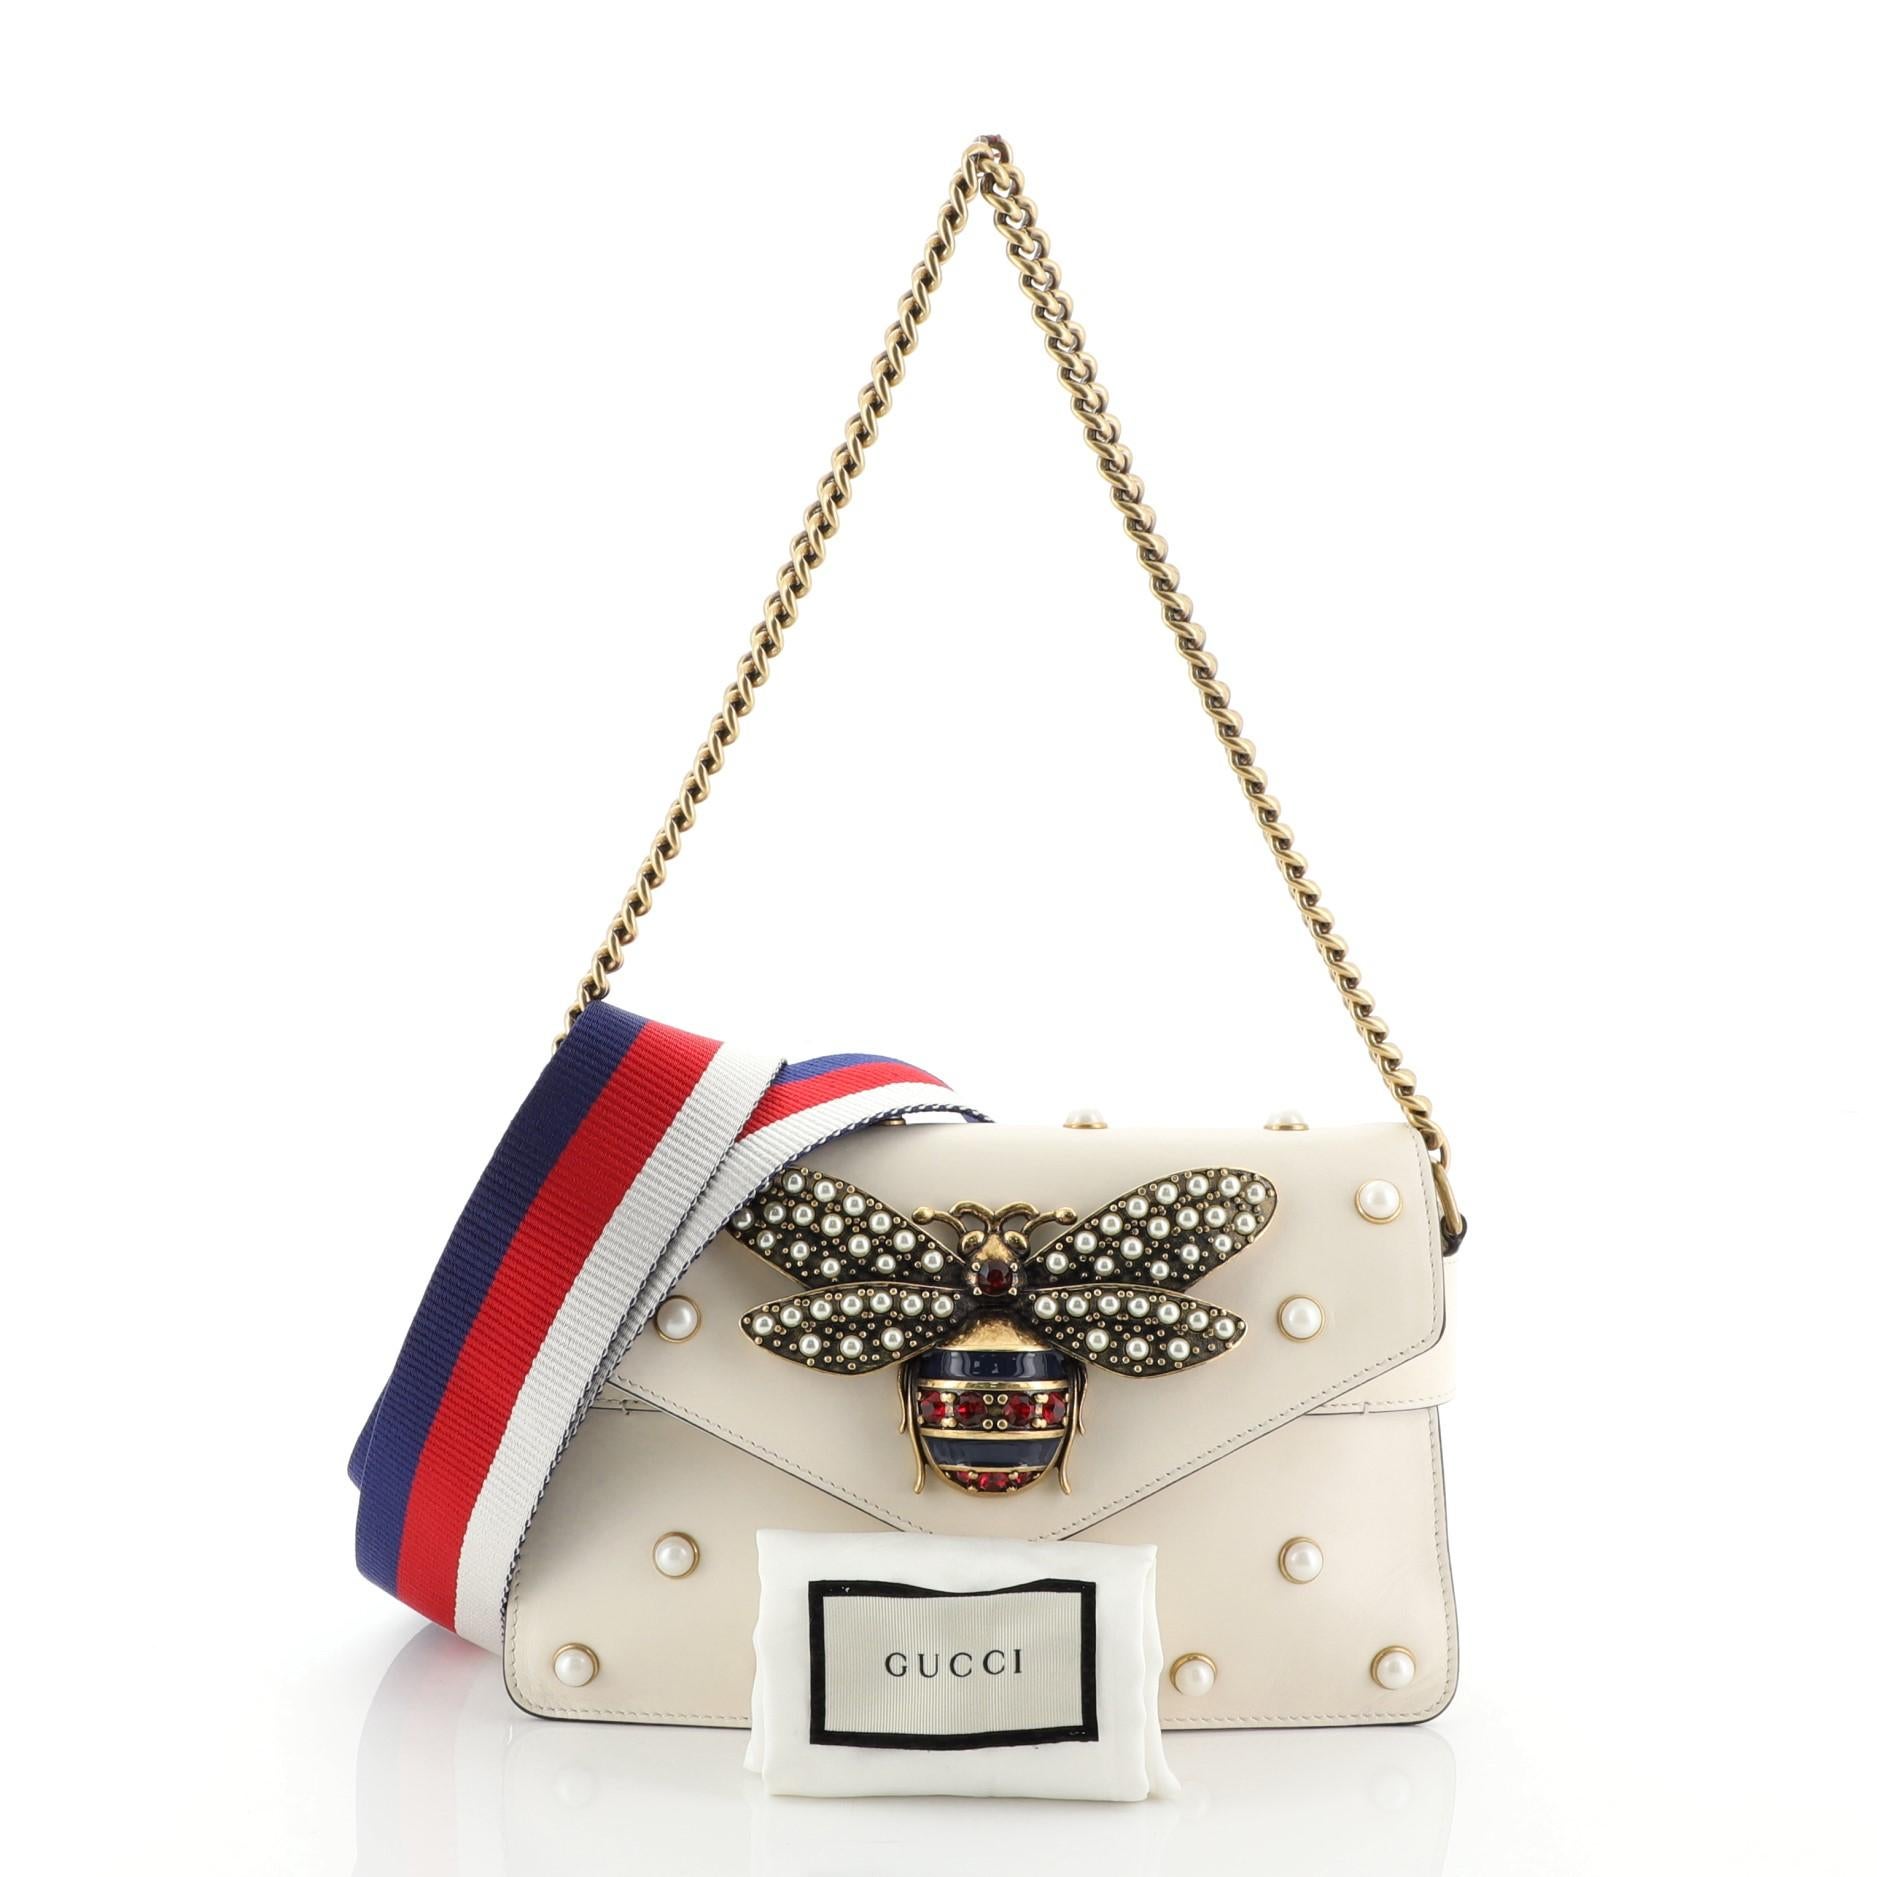 This Gucci Broadway Pearly Bee Shoulder Bag Embellished Leather Mini, crafted from white leather, features chain link strap, multiple pearl studs, metal bee design, and antique brass-tone tone hardware. Its magnetic snap closure opens to a brown